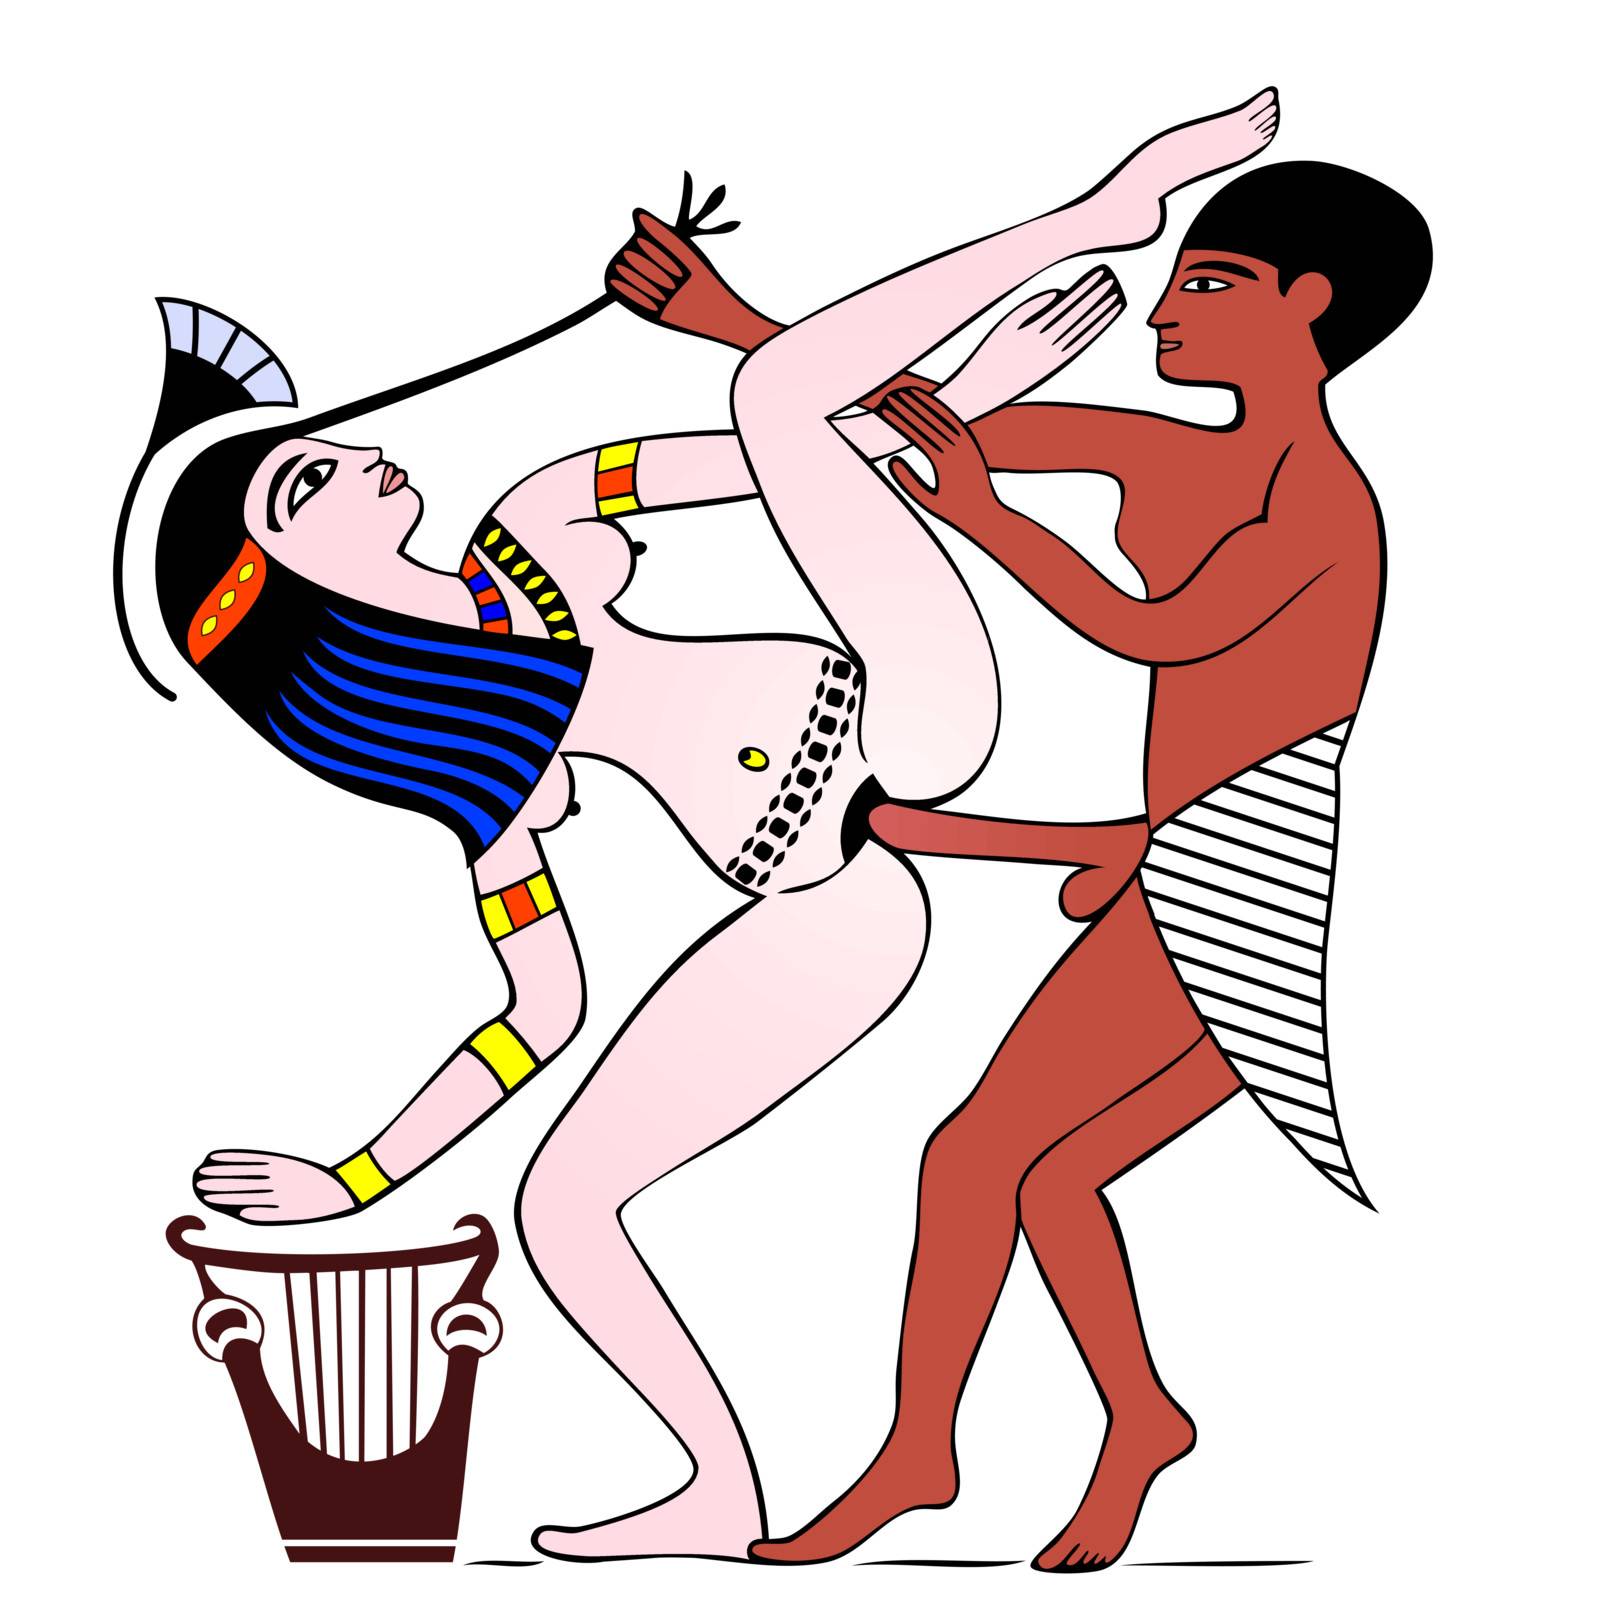 erotic art of ancient Egypt by Mibuch